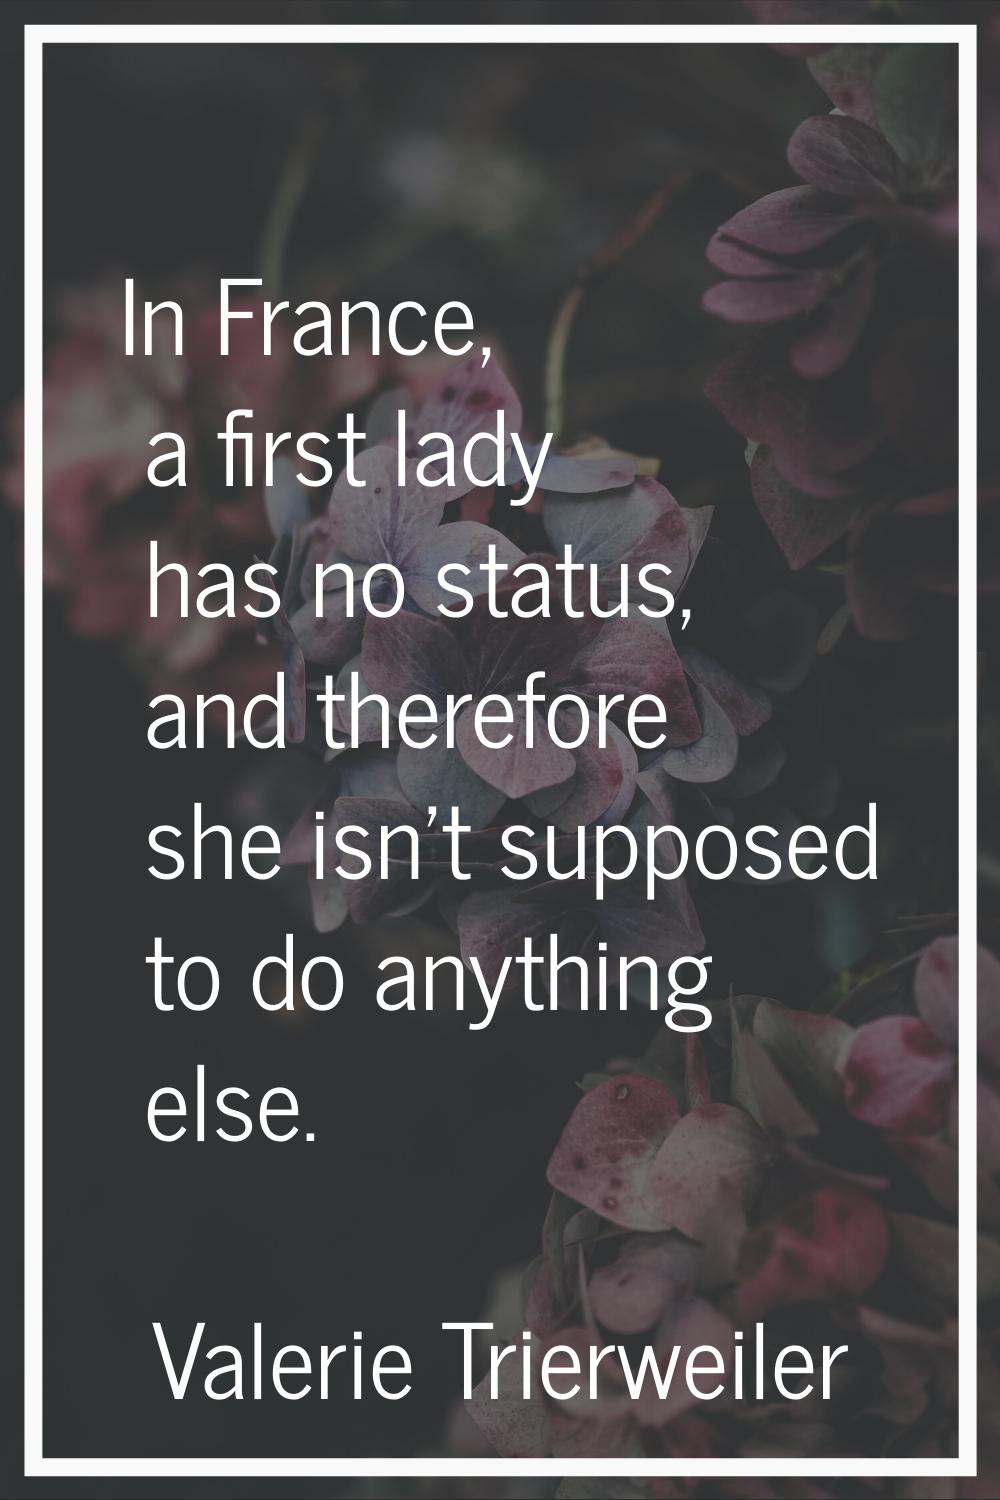 In France, a first lady has no status, and therefore she isn't supposed to do anything else.